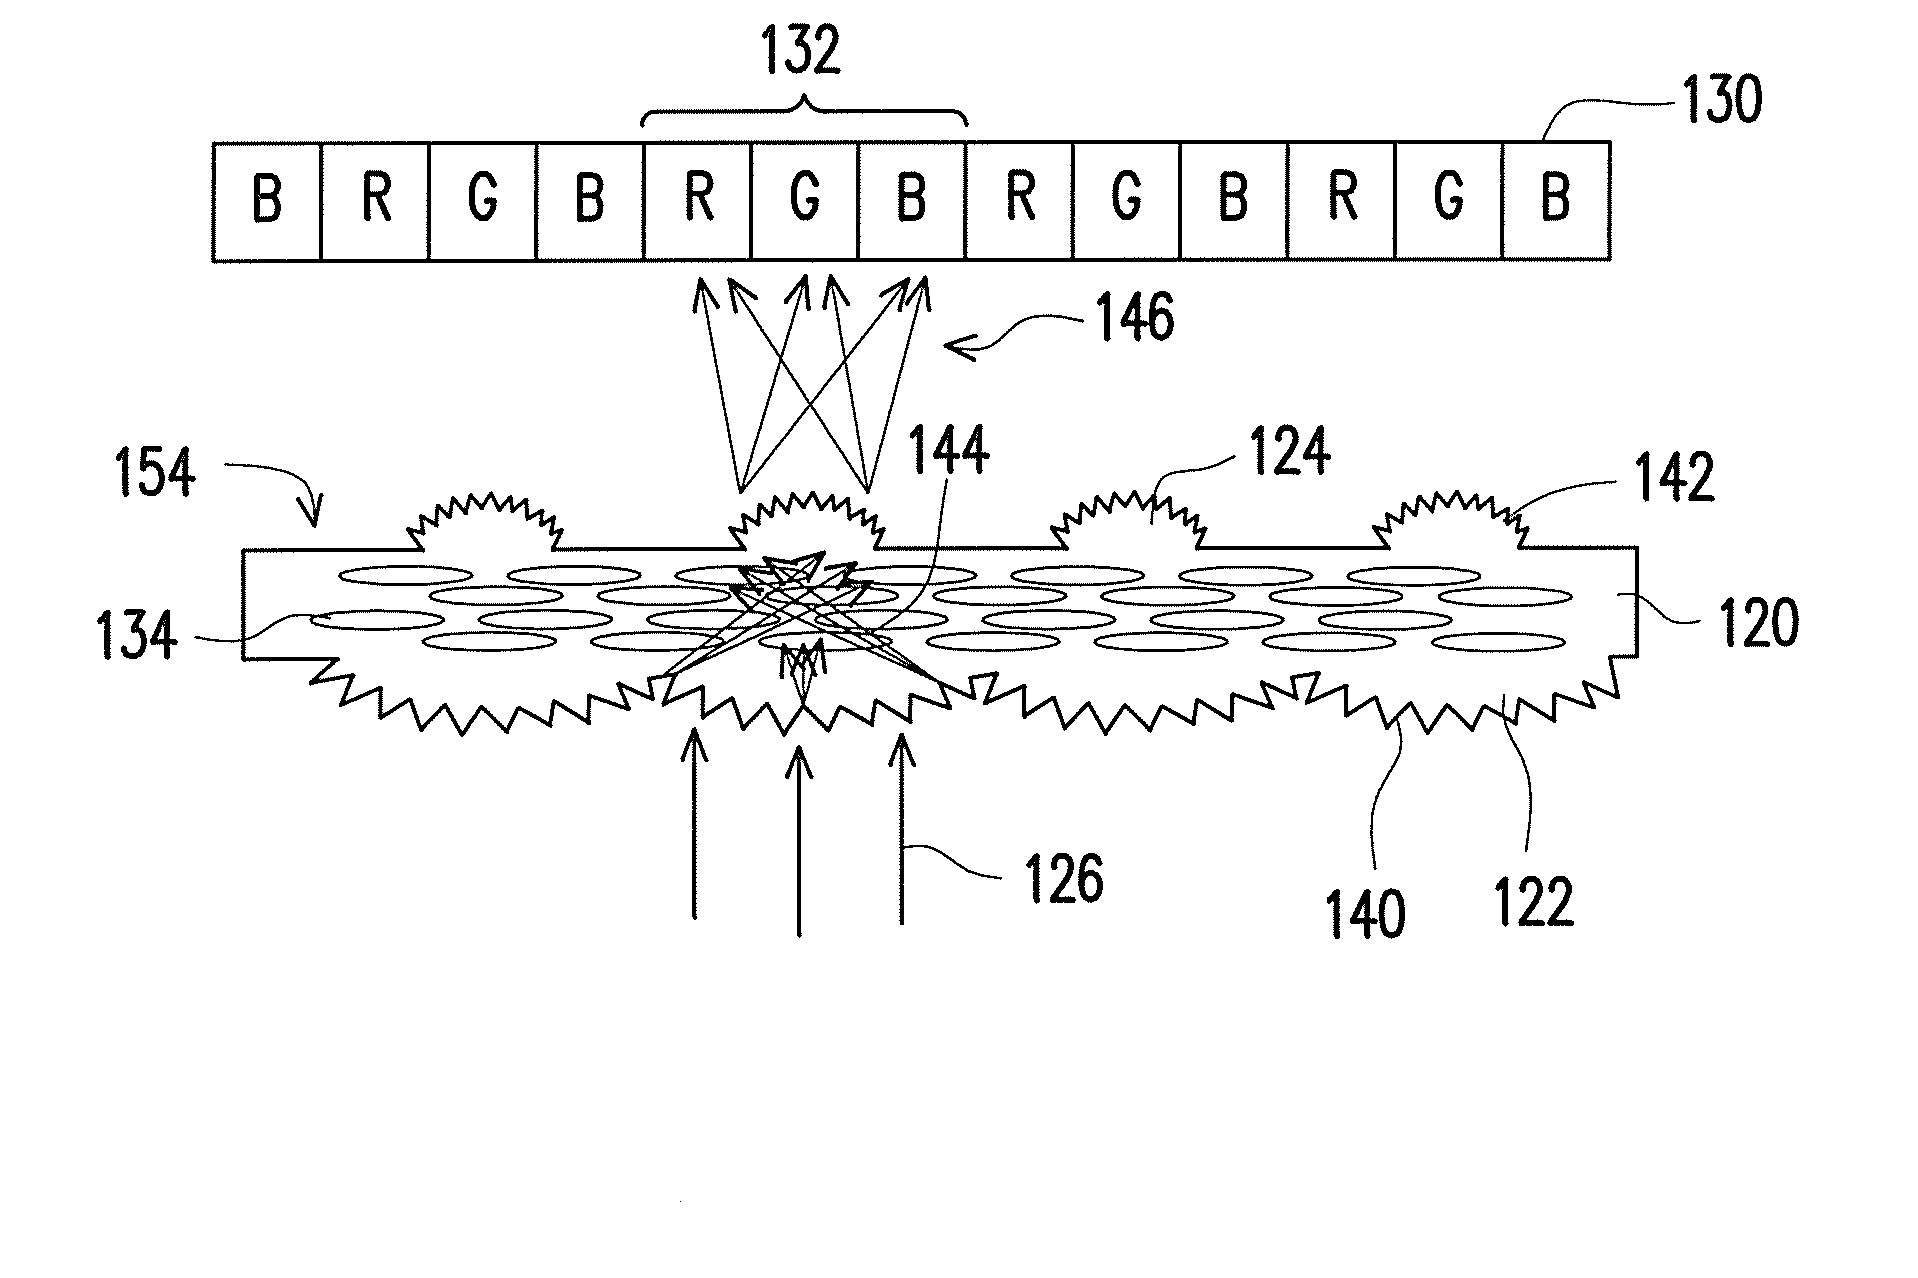 Color dividing optical device and image apparatus with the application